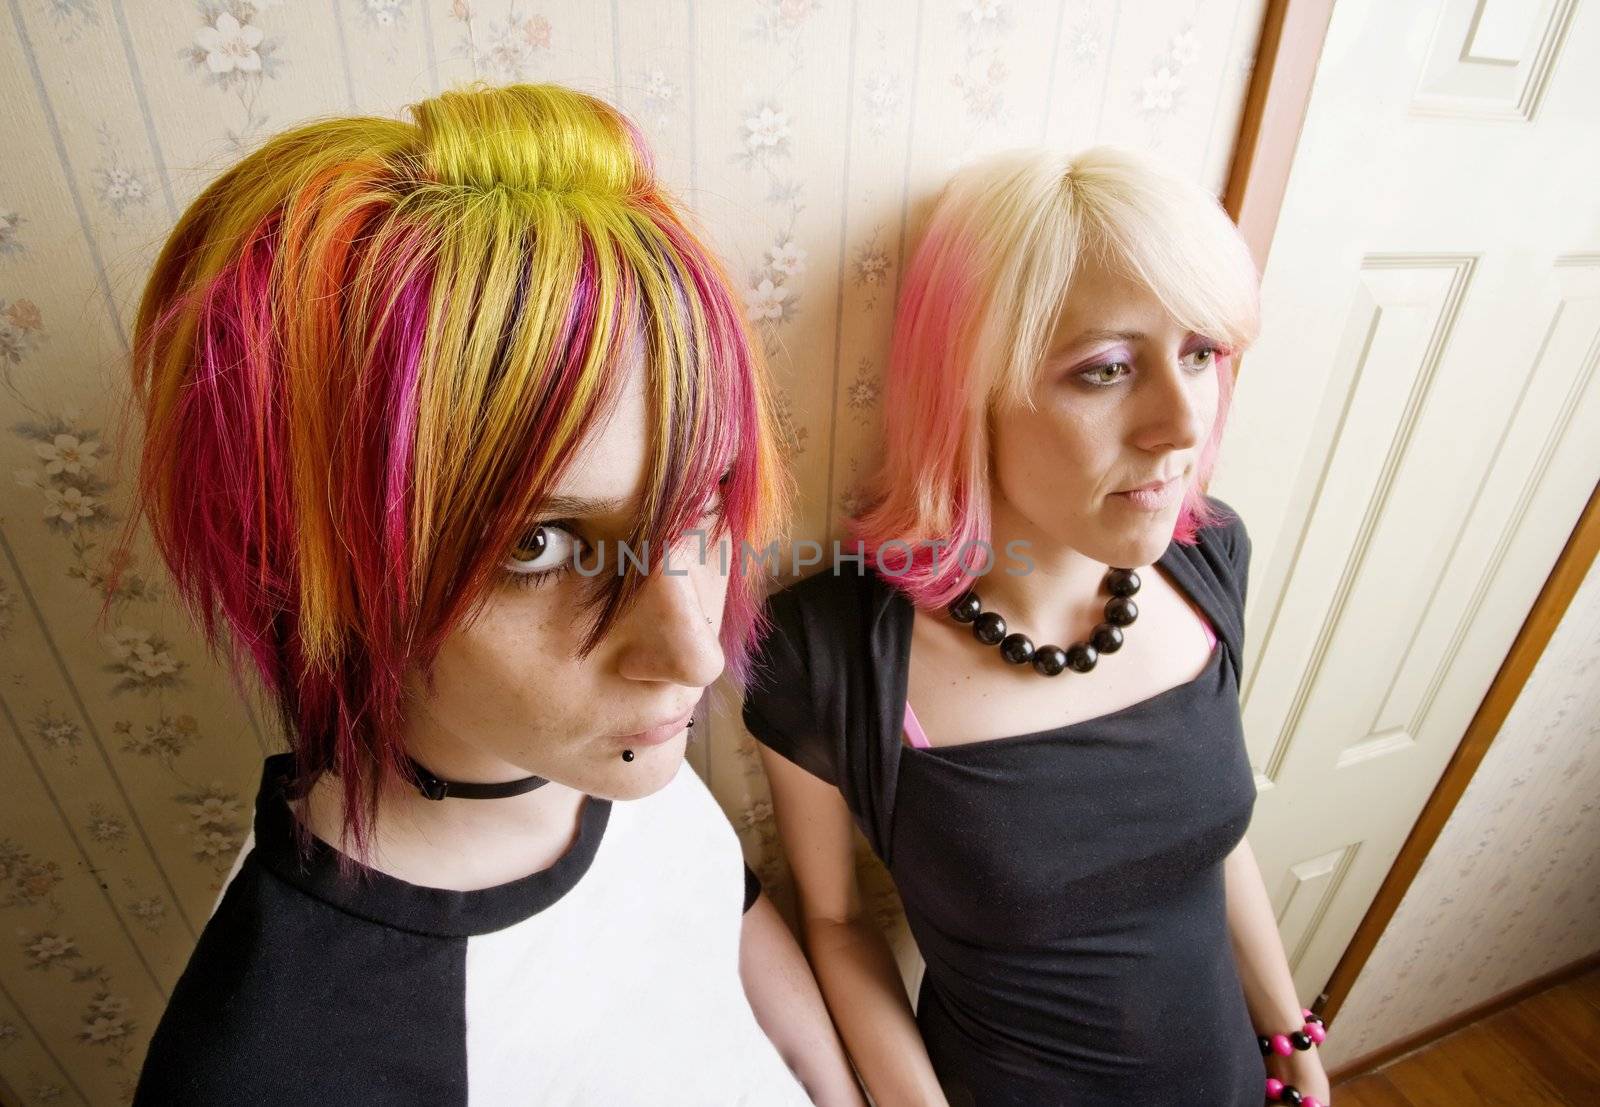 Women in colorful hair leaning a wall in a hallway